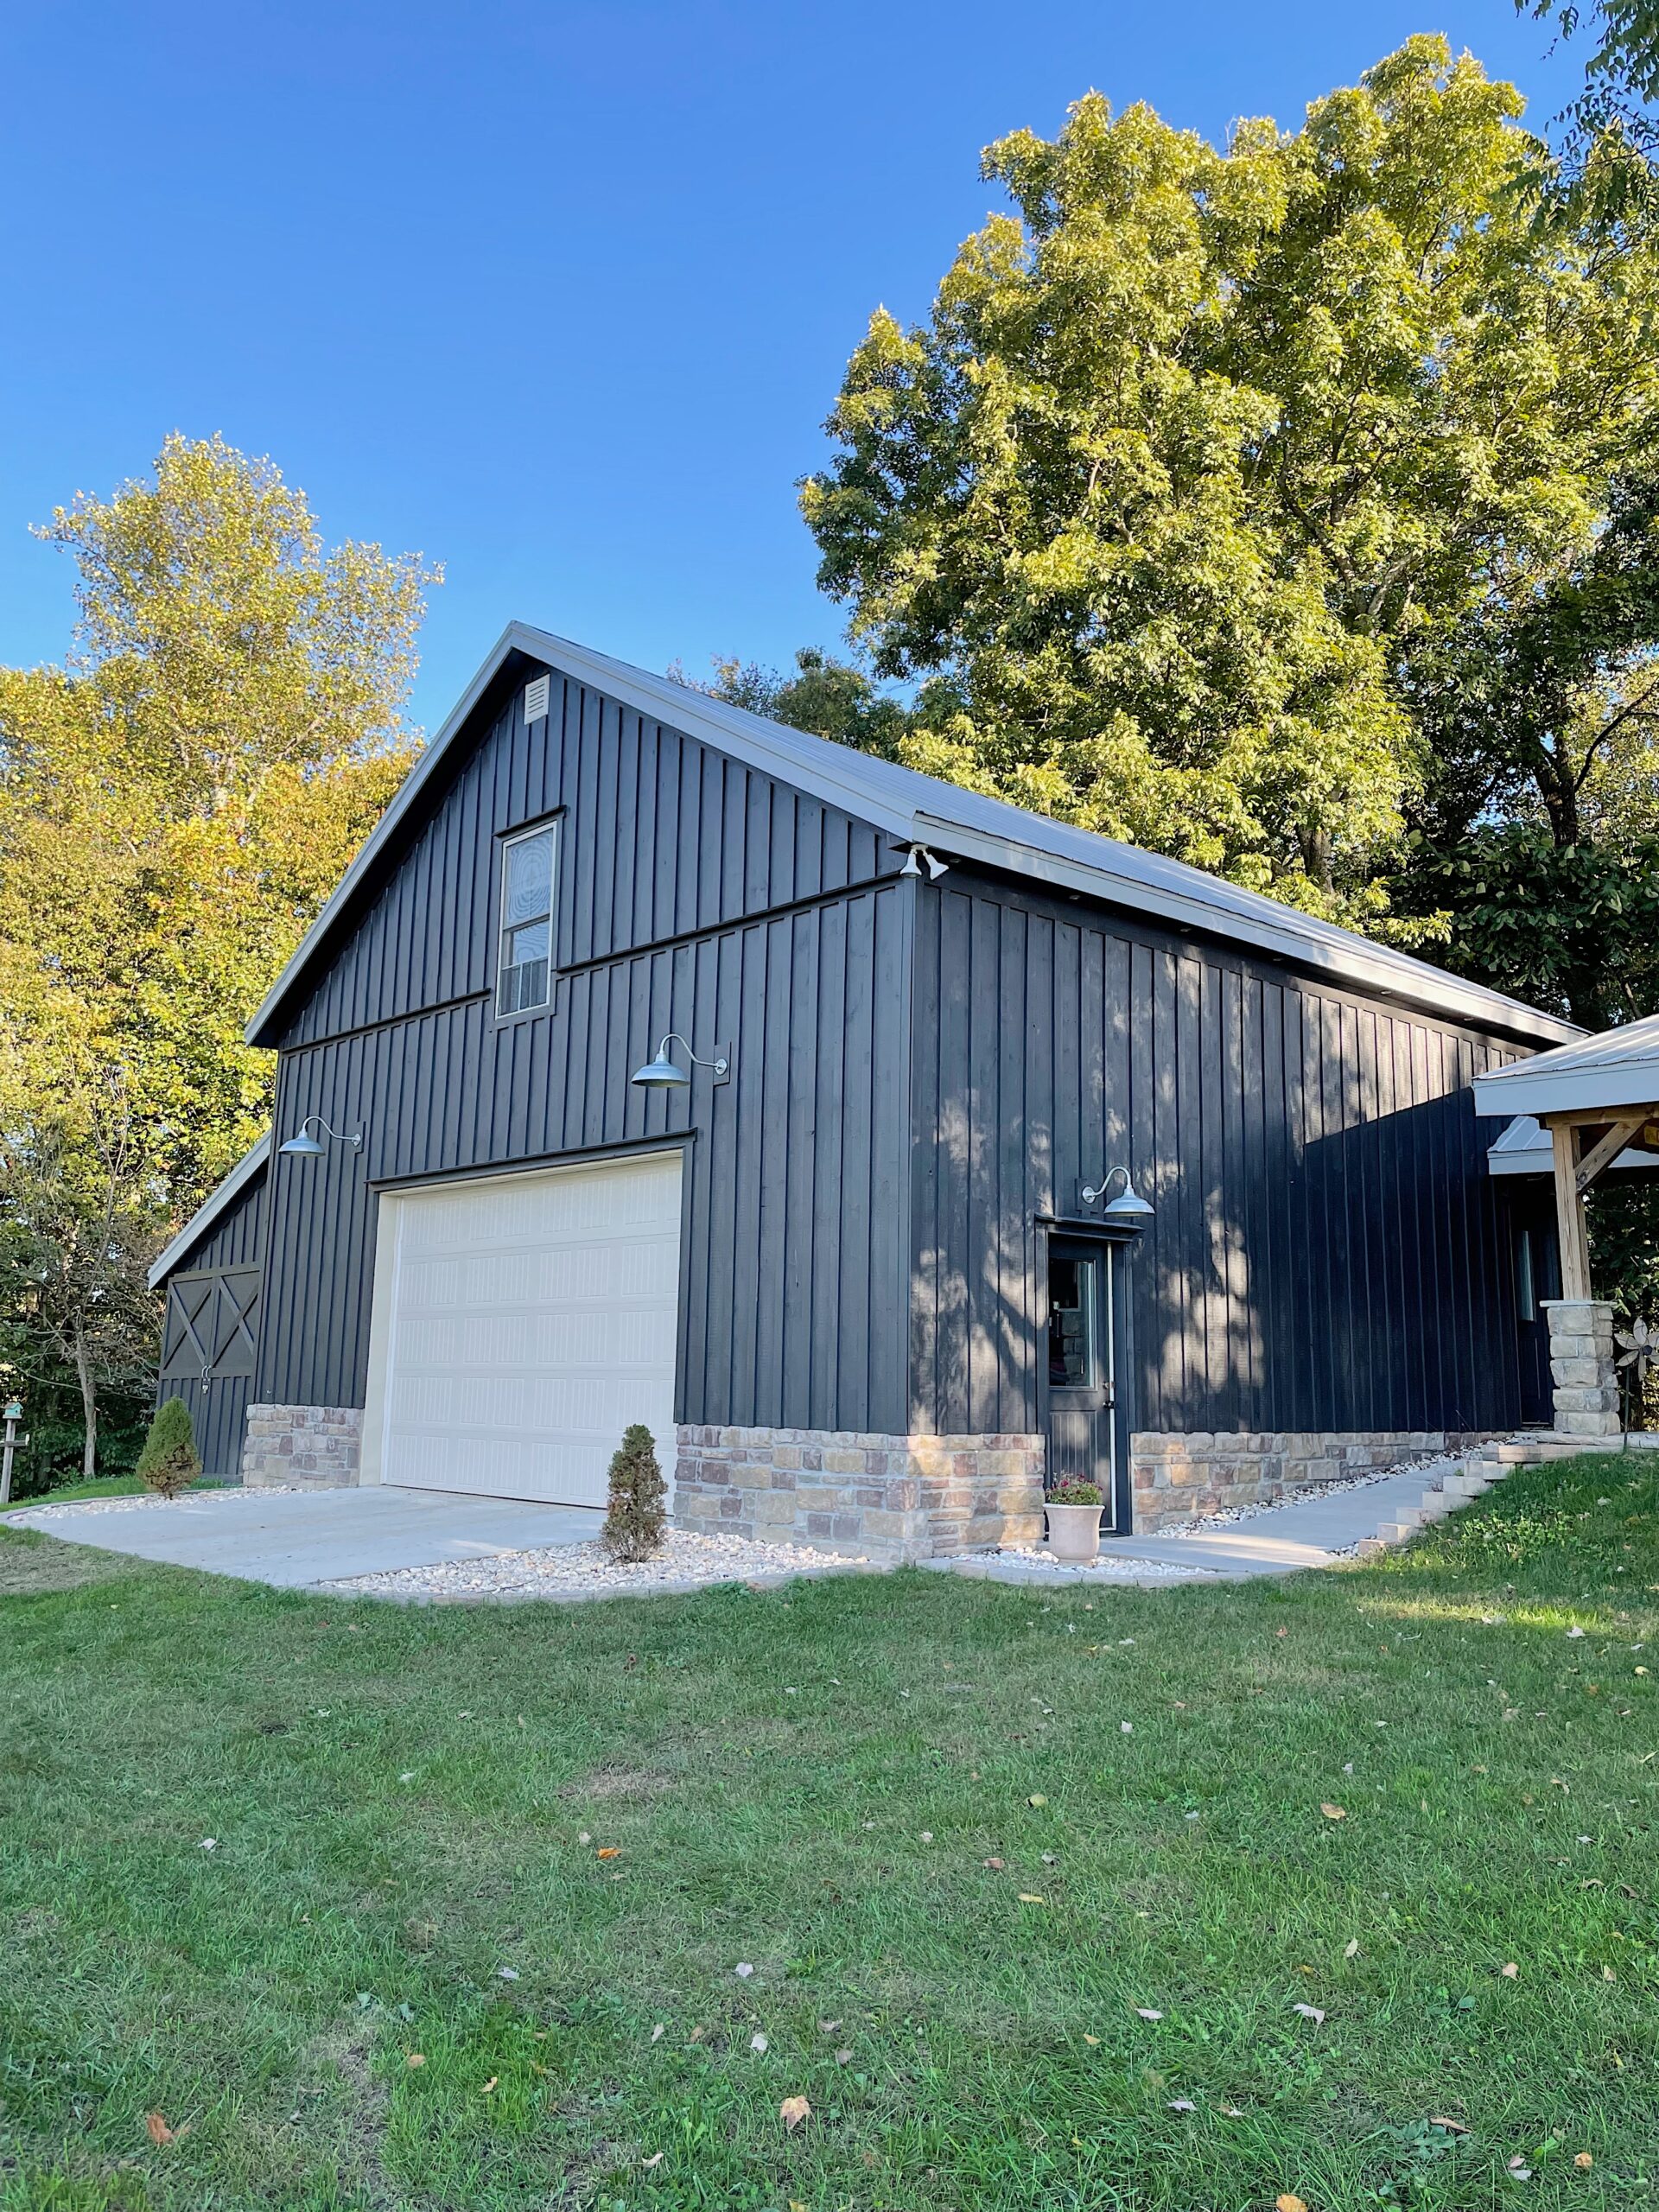 Black barn with stone foundation, two car garage and gray metal roof surrounded by trees